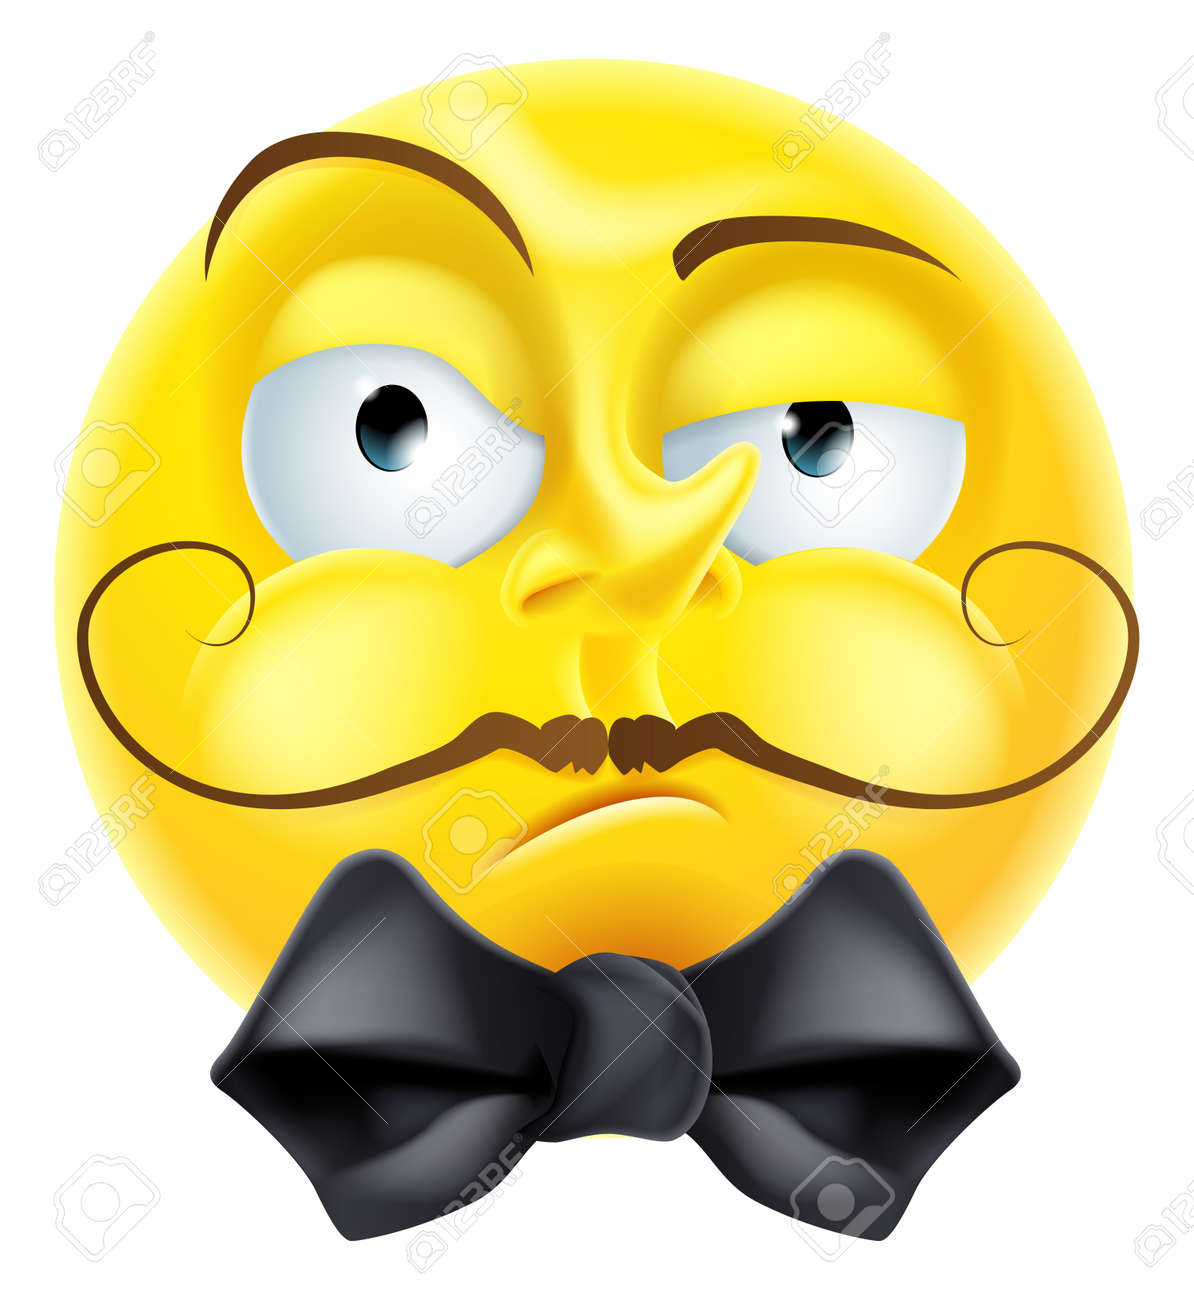 44878310-a-snooty-arrogant-condescending-looking-emoji-emoticon-smiley-face-character-with-a-bow-tie-and-rais.jpg